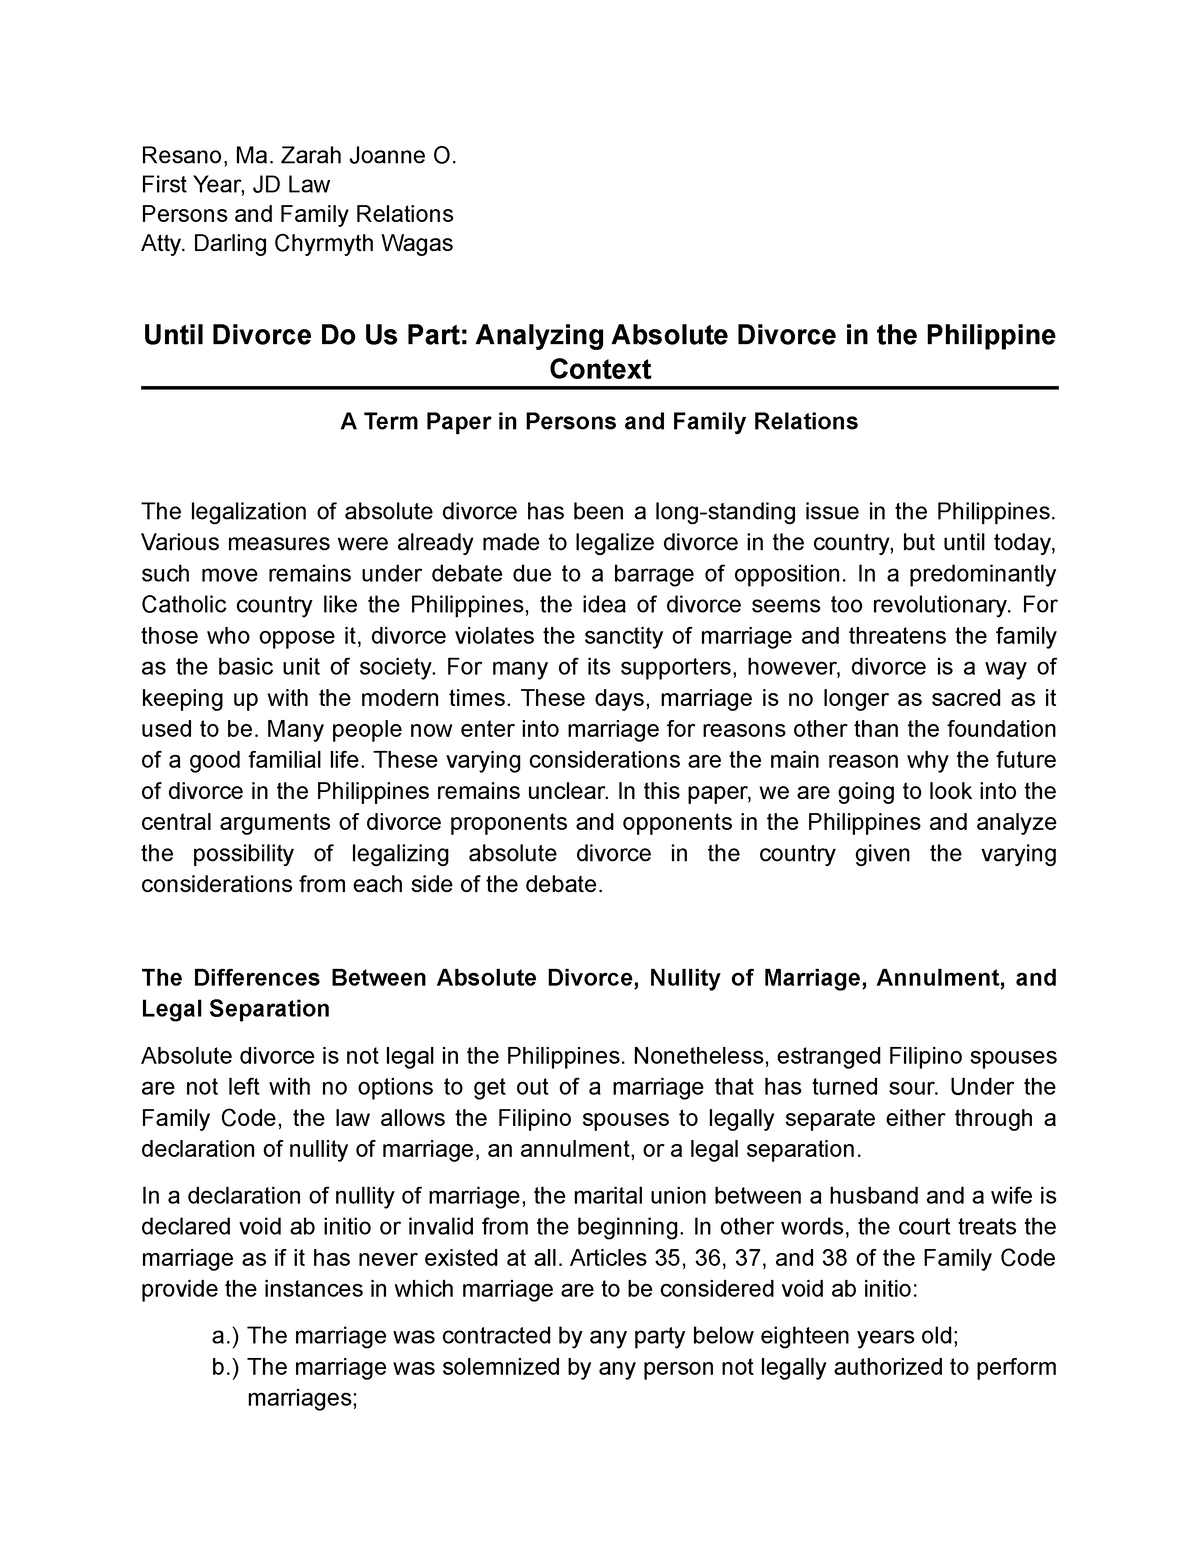 research paper about divorce in the philippines pdf